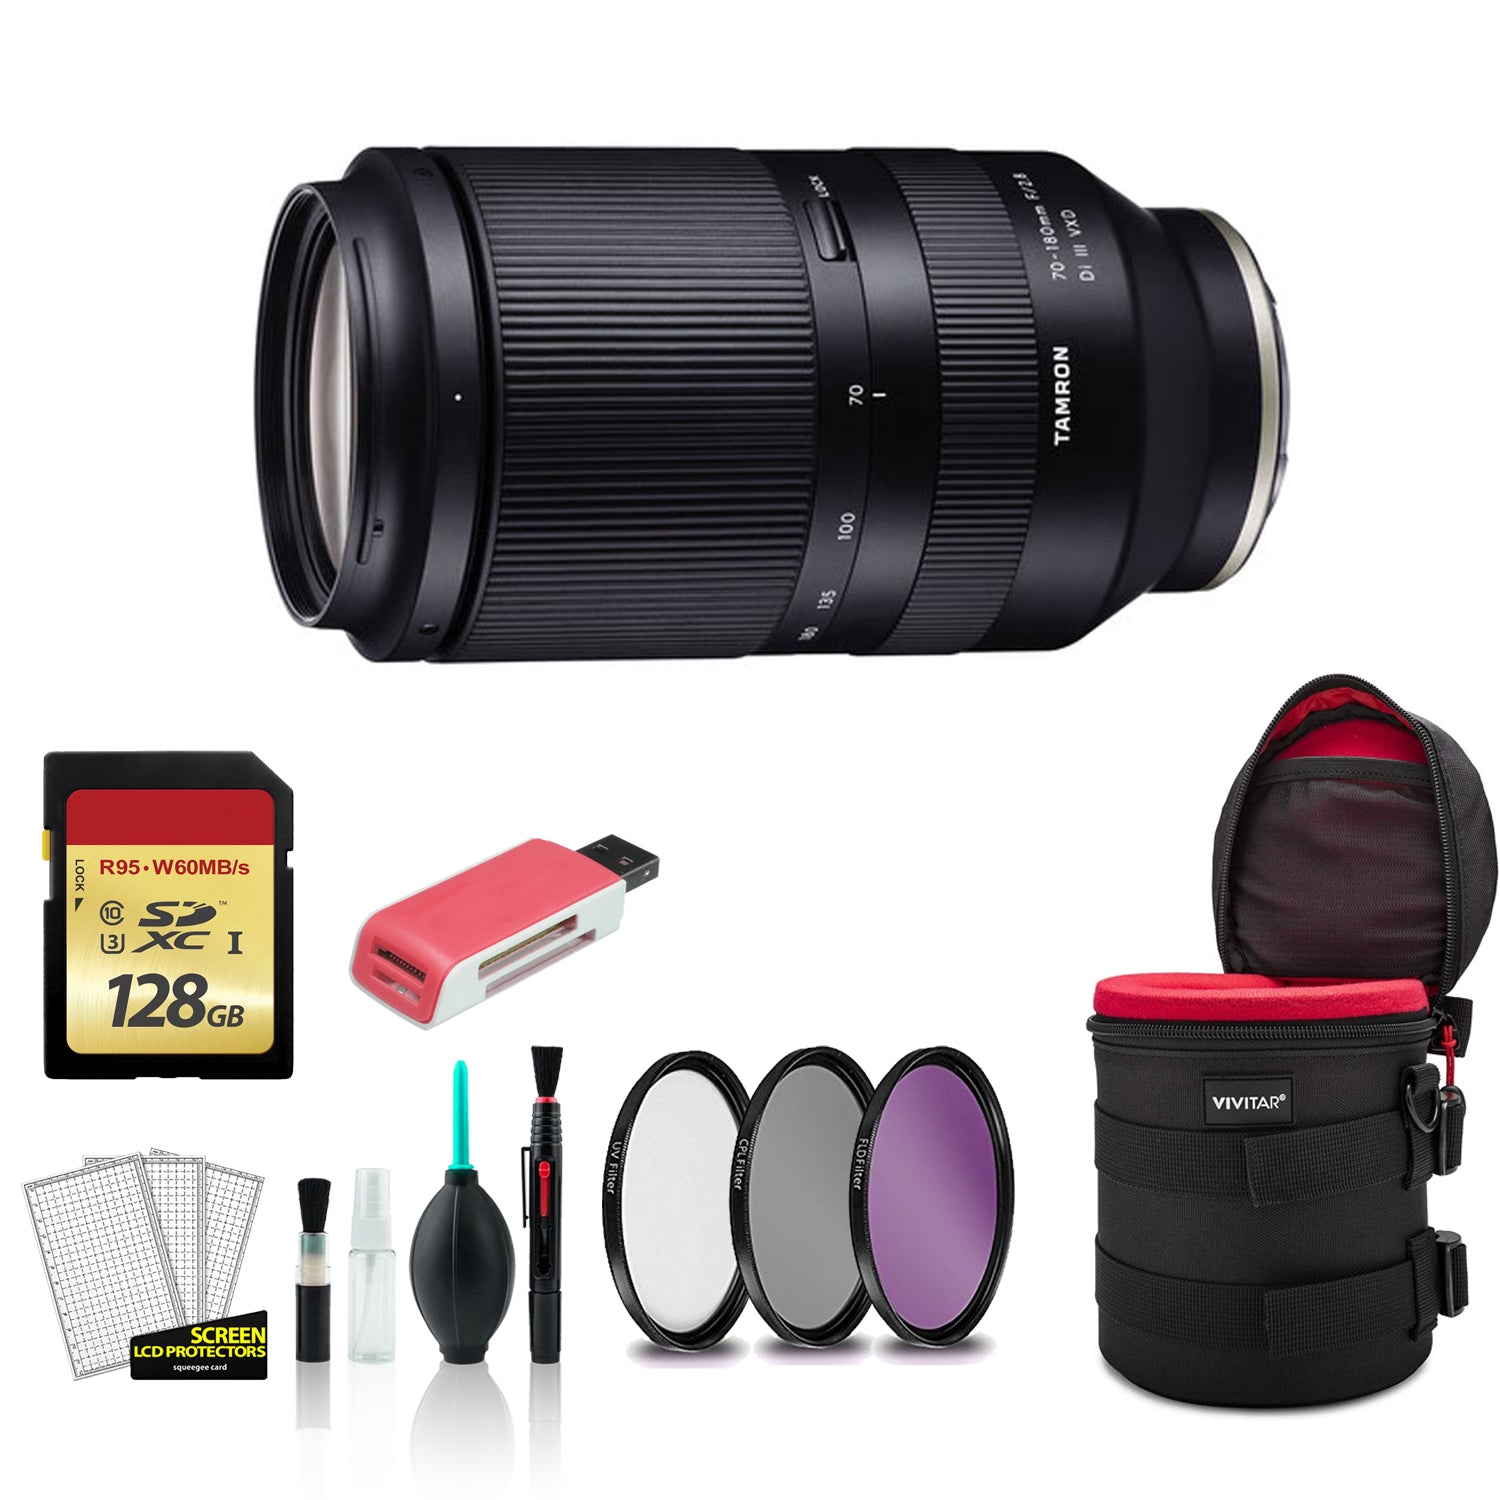 Tamron 70-180mm Lens for Sony E - Kit with 128GB Memory Card + More